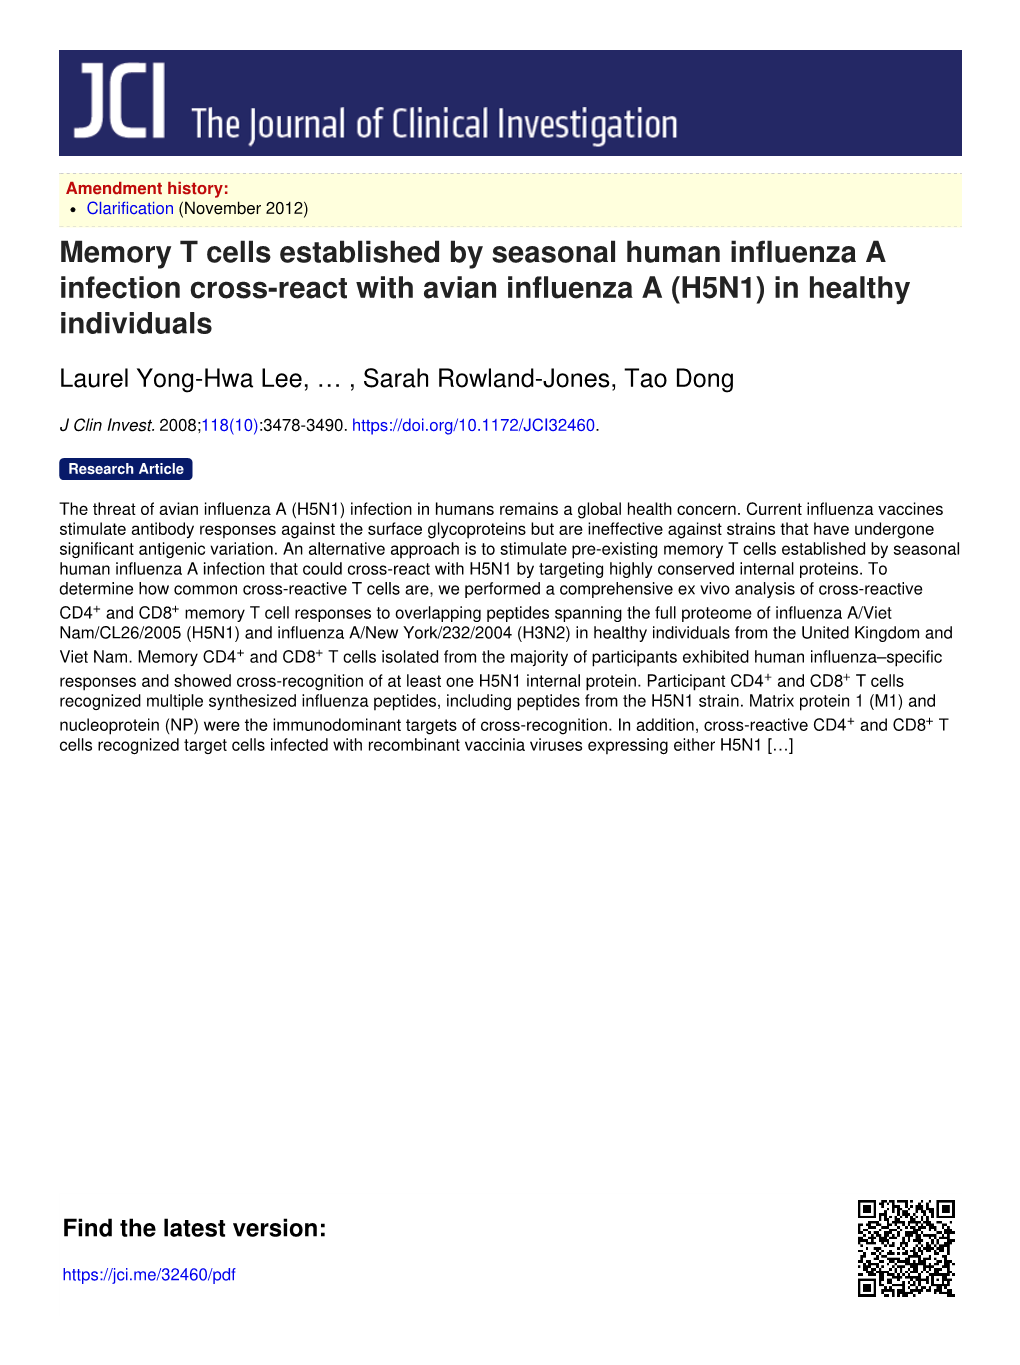 Memory T Cells Established by Seasonal Human Influenza a Infection Cross-React with Avian Influenza a (H5N1) in Healthy Individuals